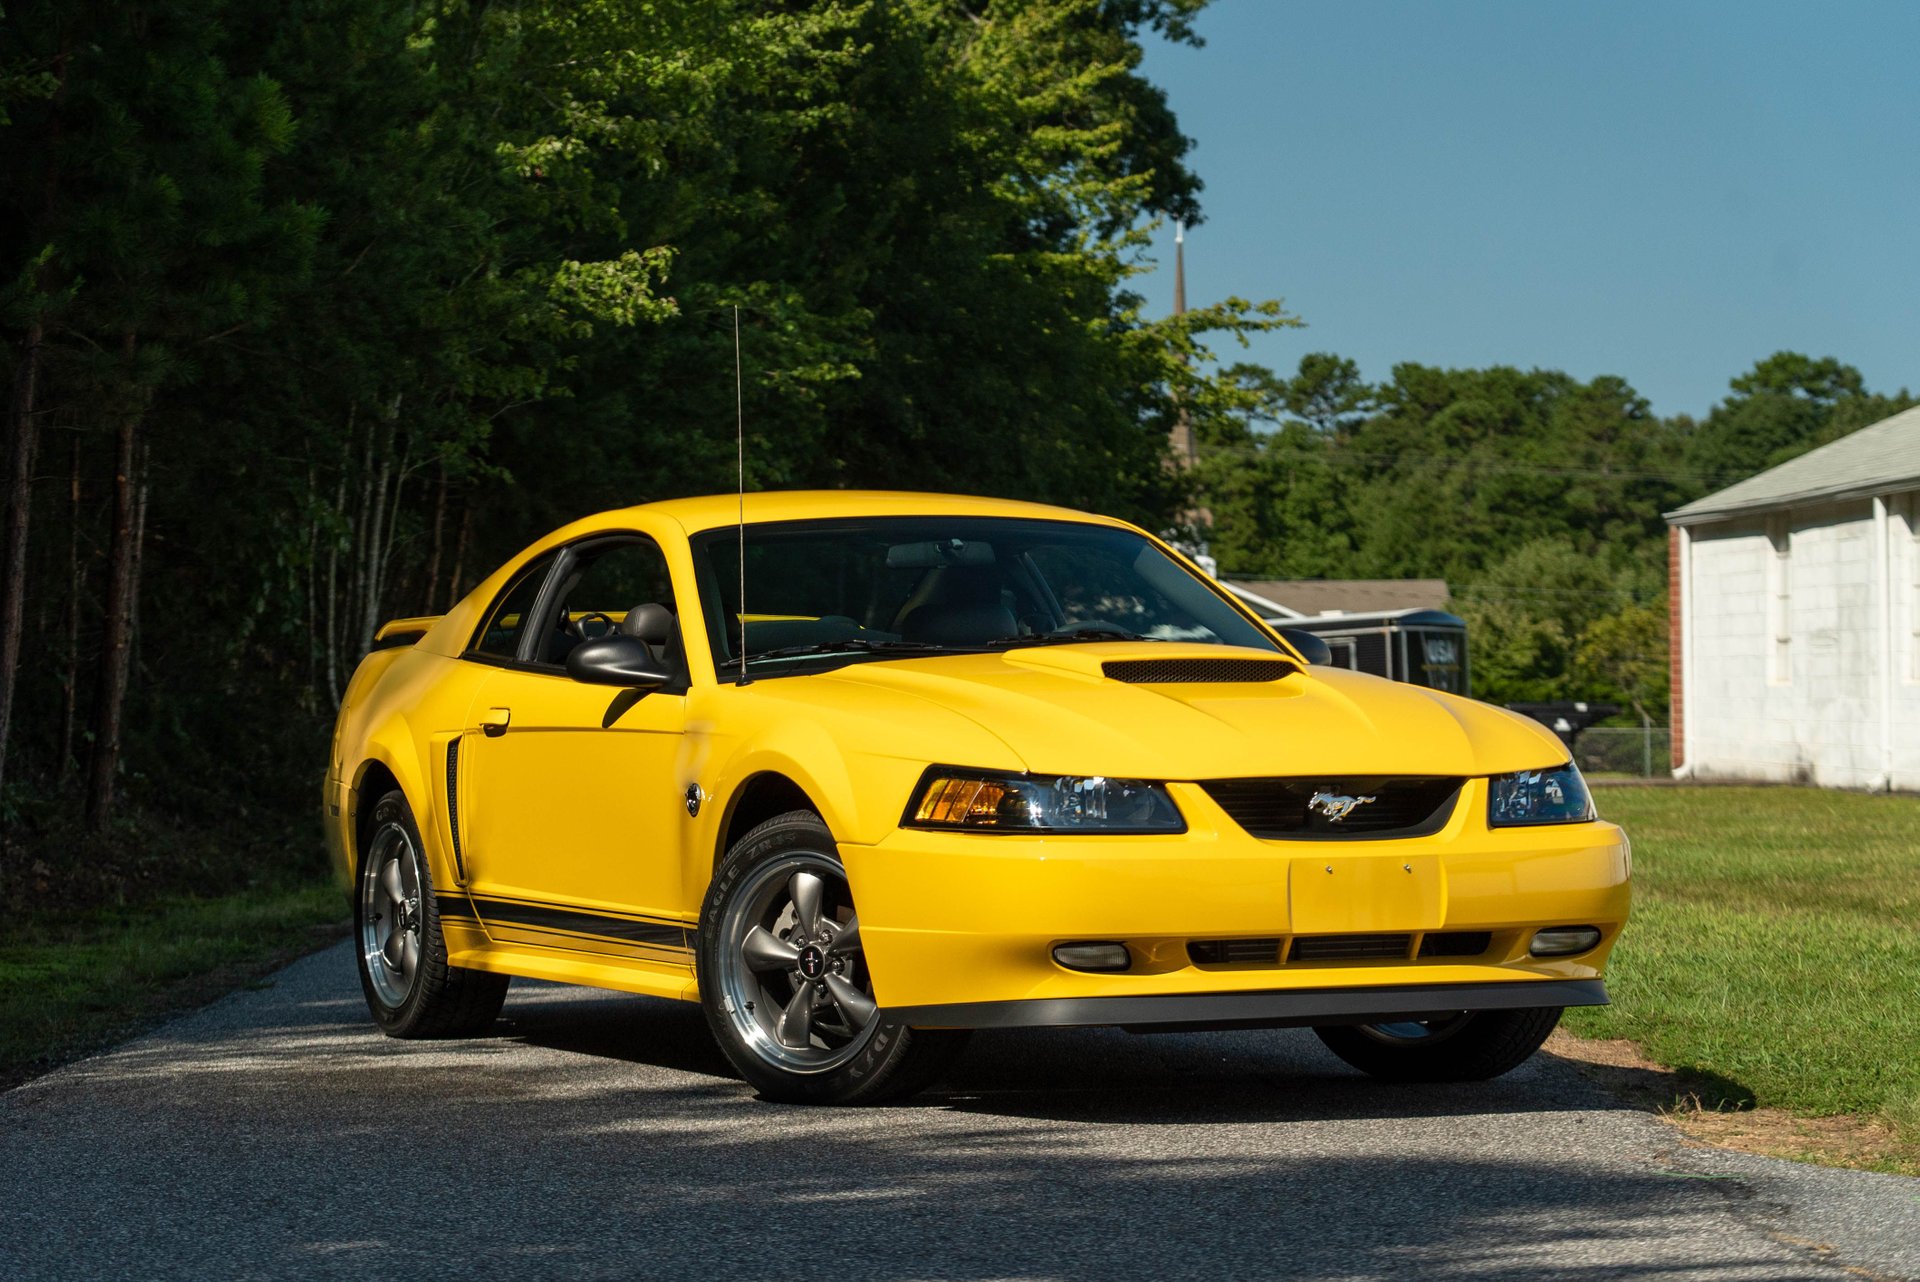 2004 Ford Mustang | GAA Classic Cars